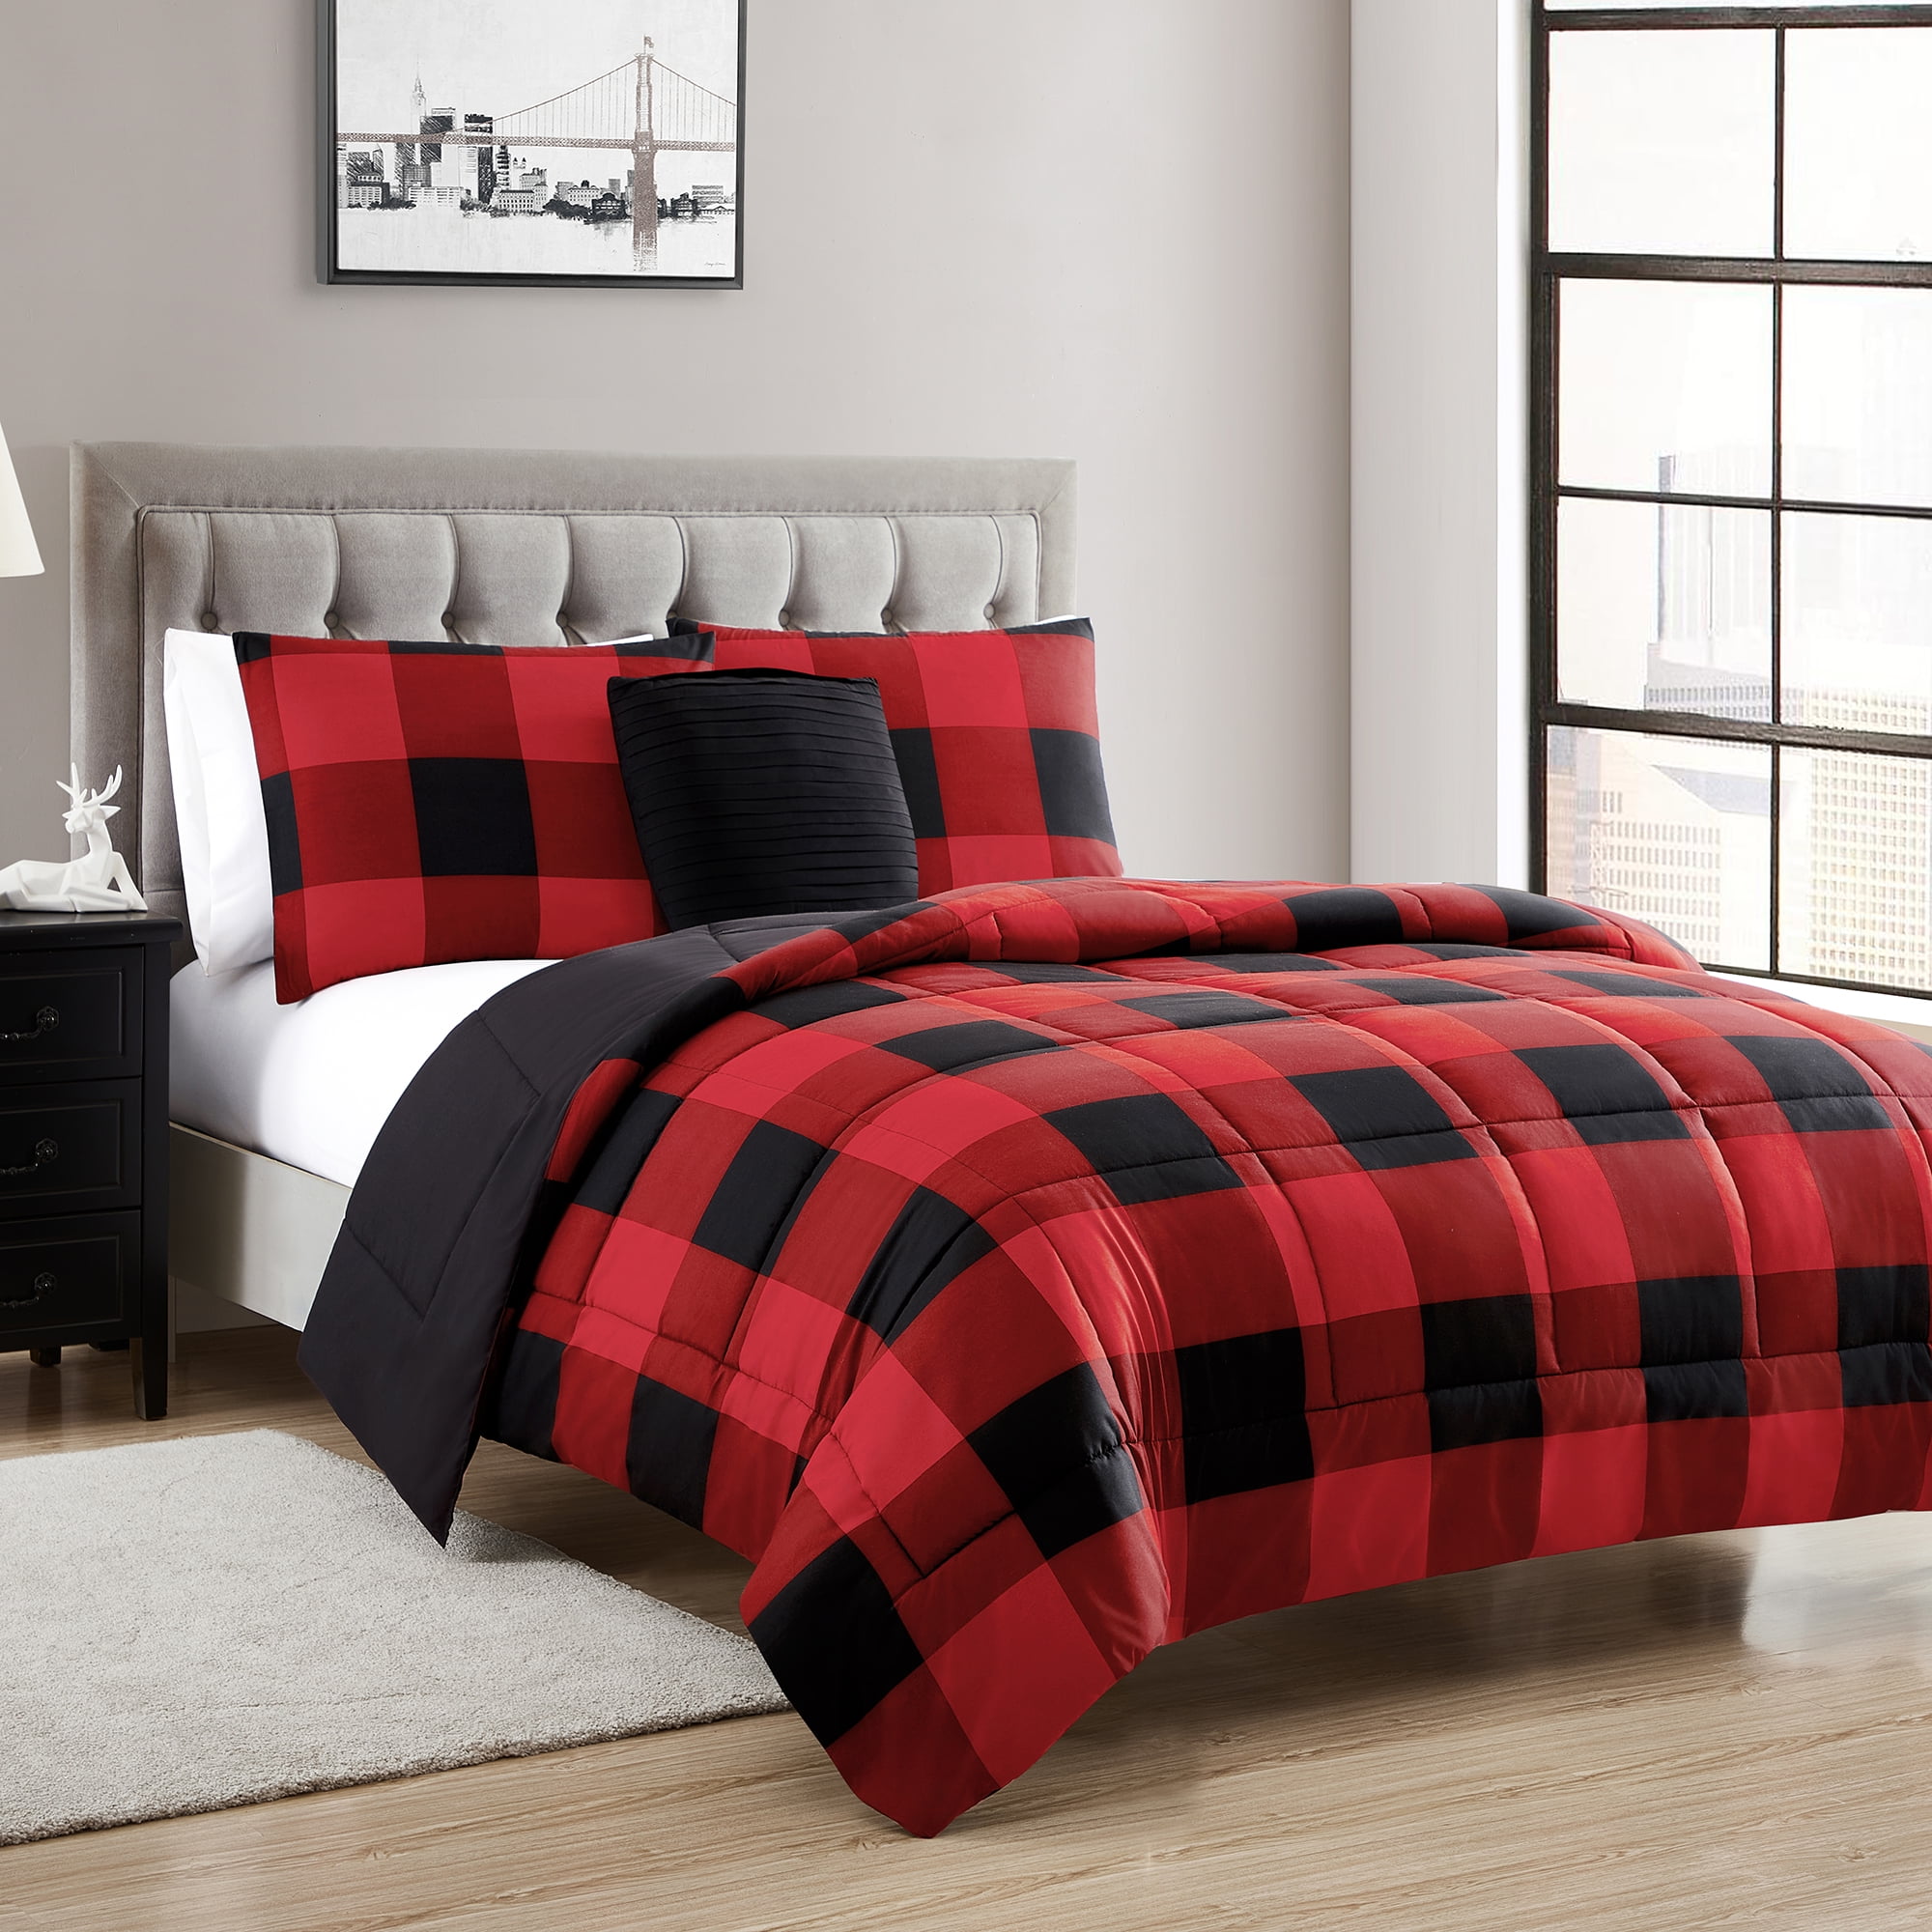 Luxury Black Checkered Quilted Microfiber Coverlet Bedspread AND Shams 